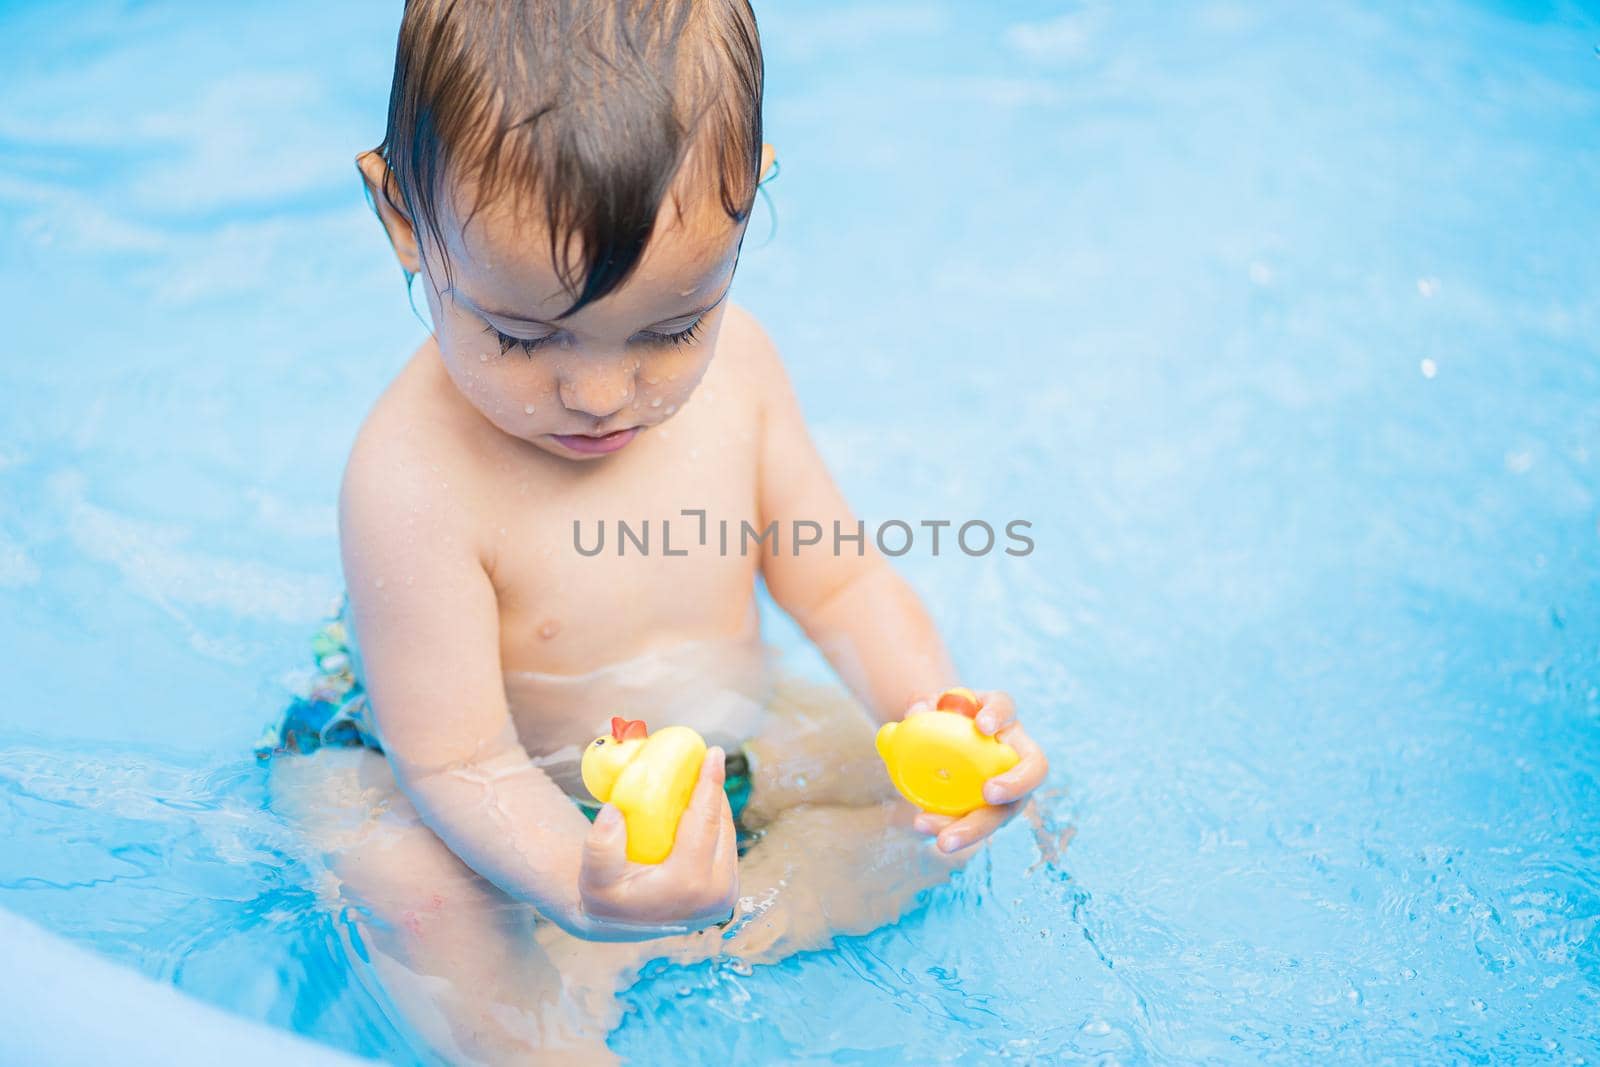 Cute little child bathing in blue street pool in courtyard. Portrait of joyful toddler, baby. Kid laughs, splashes water, smiles. Concept of healthy lifestyle, family, leisure in summer. quality photo